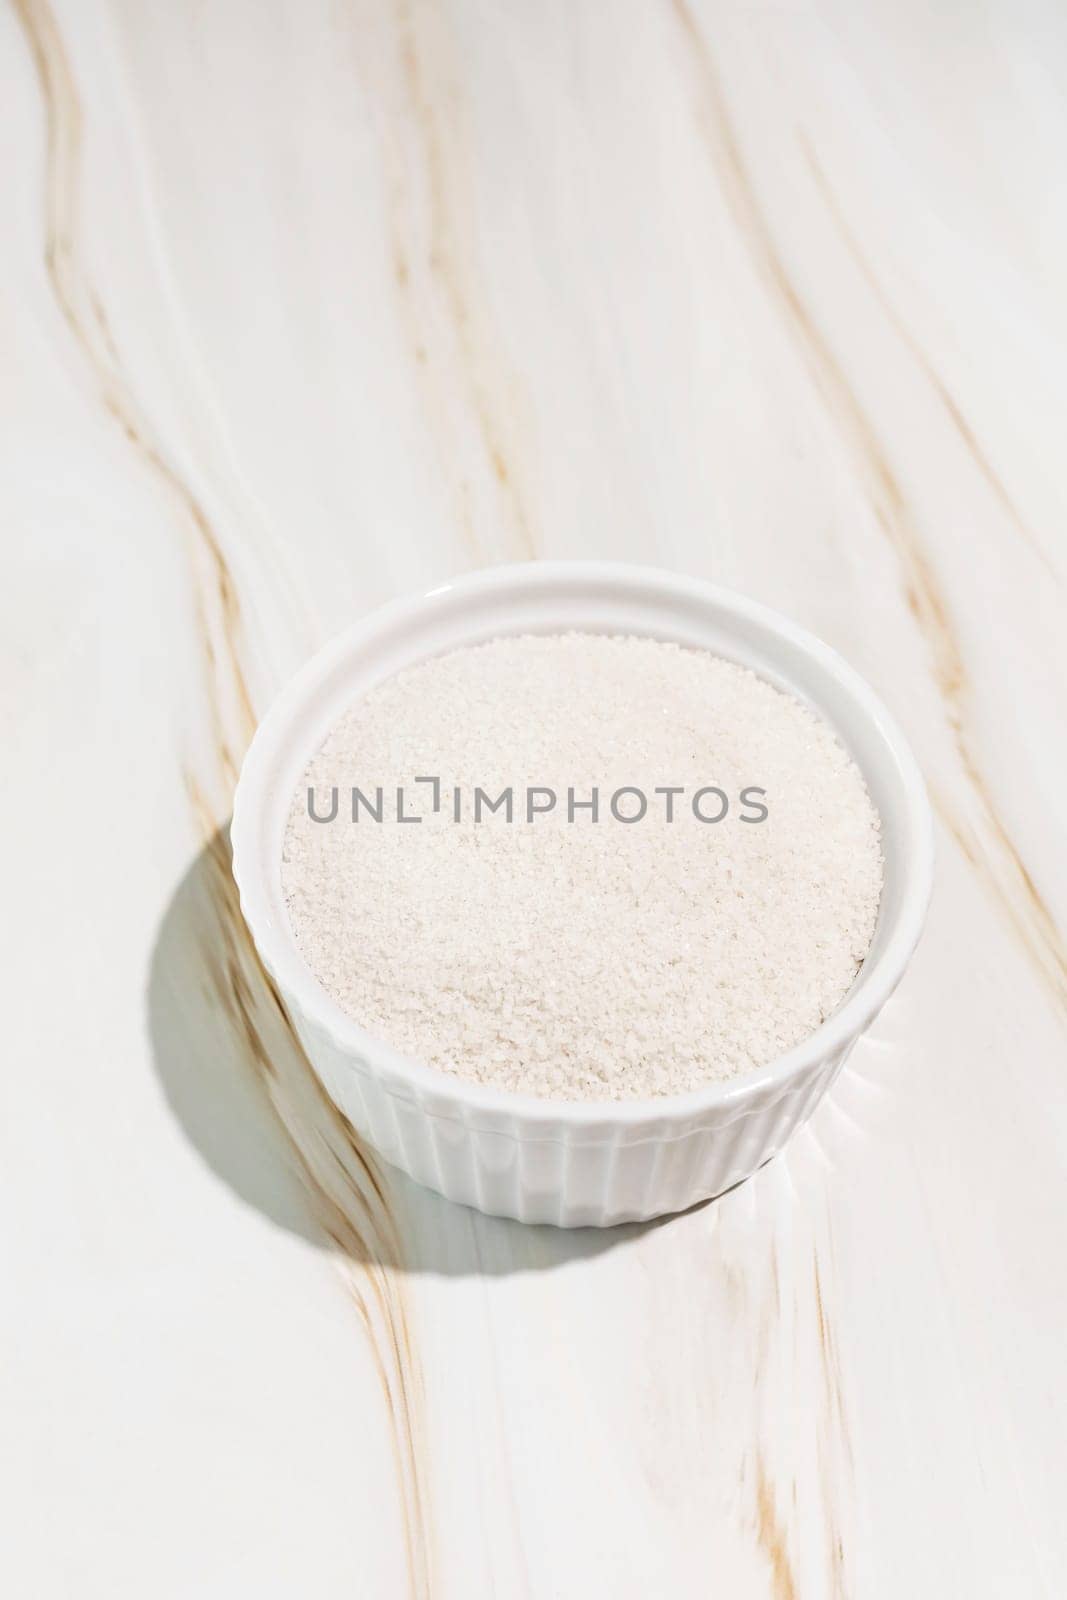 Celtic Gray Sea Salt In A White Ceramic Bowl On Granite Table, Copy Space. Vertical Plane. Natural And Unrefined Salt Harvested From Brittany, France. Natural Minerals And Trace Elements, Superfood by netatsi